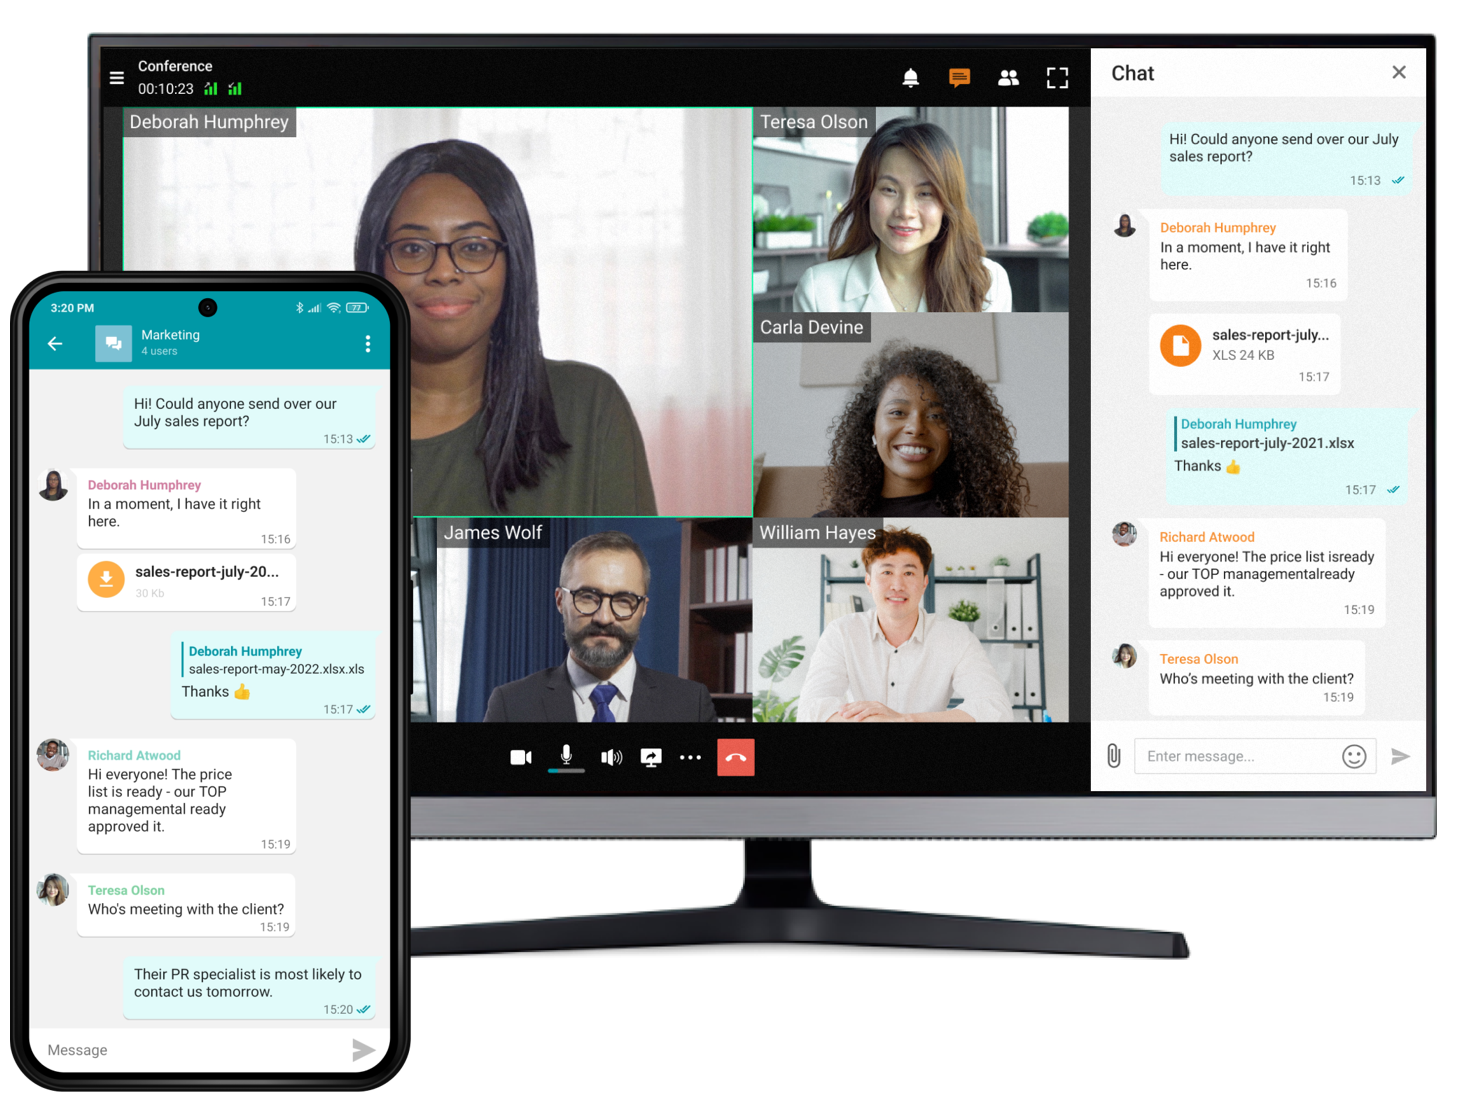 TrueConf 2.0 for Android: the all-in-one video conferencing & team messaging app 2